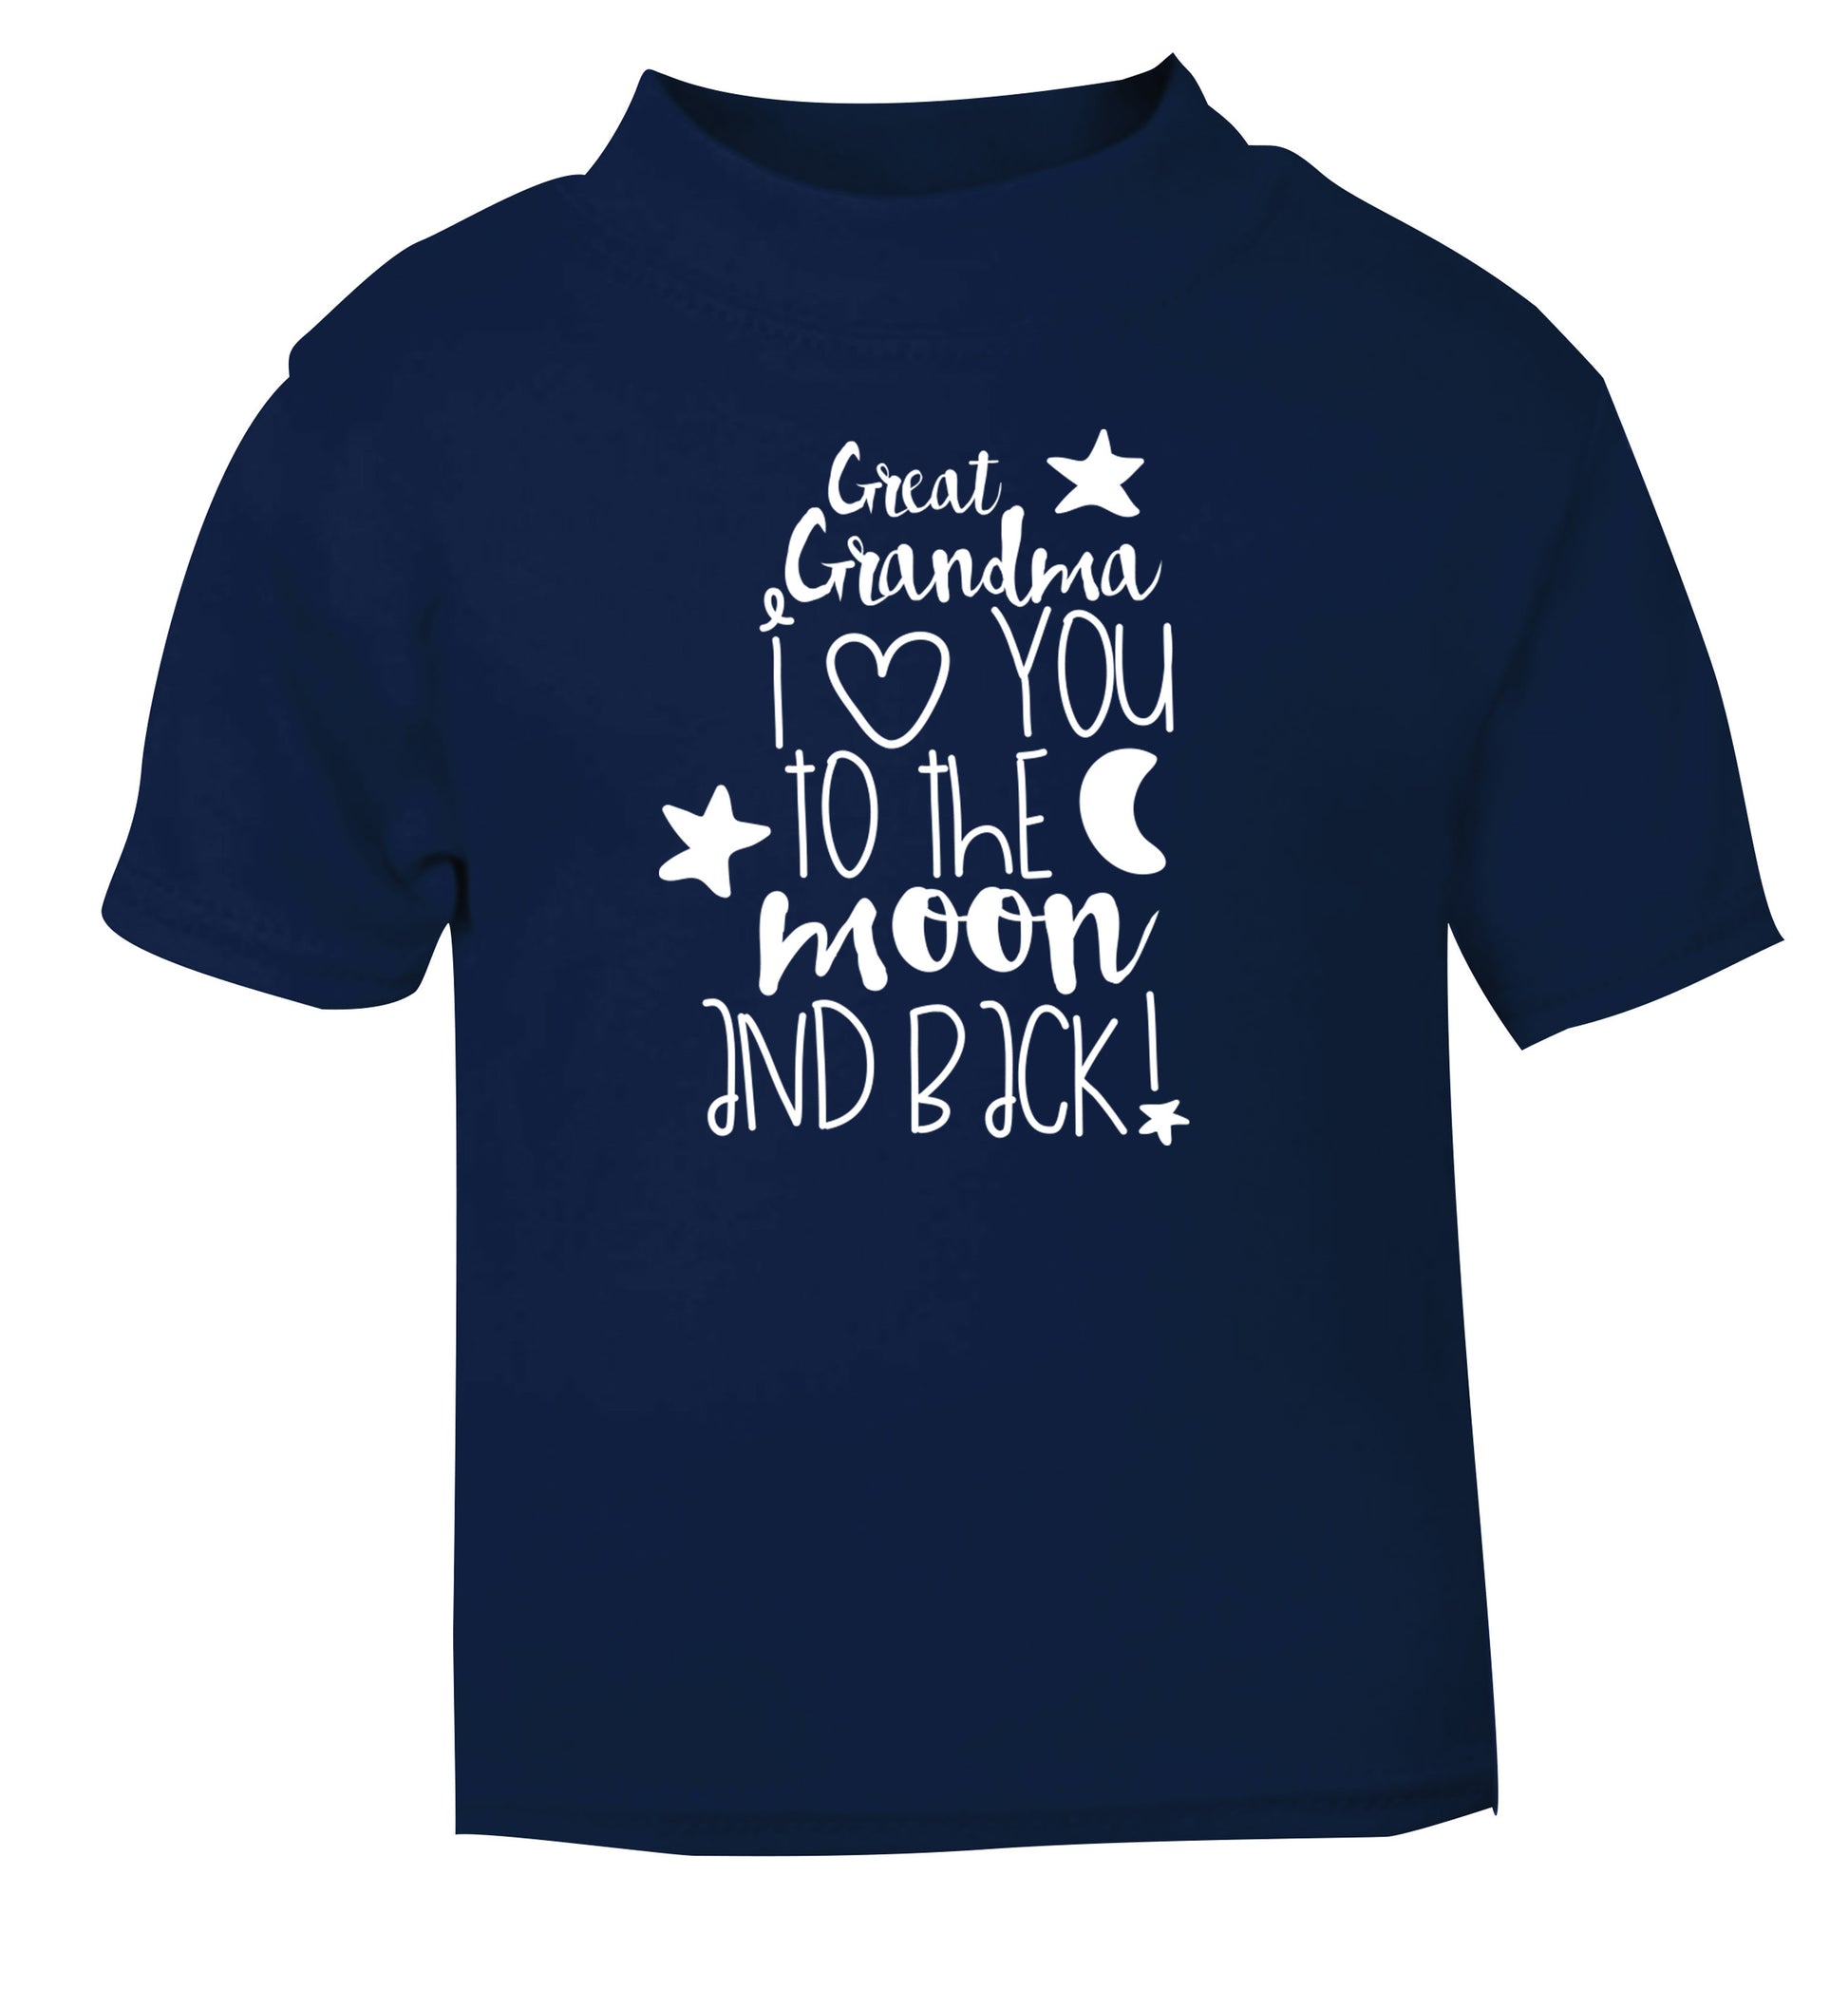 Great Grandma I love you to the moon and back navy Baby Toddler Tshirt 2 Years